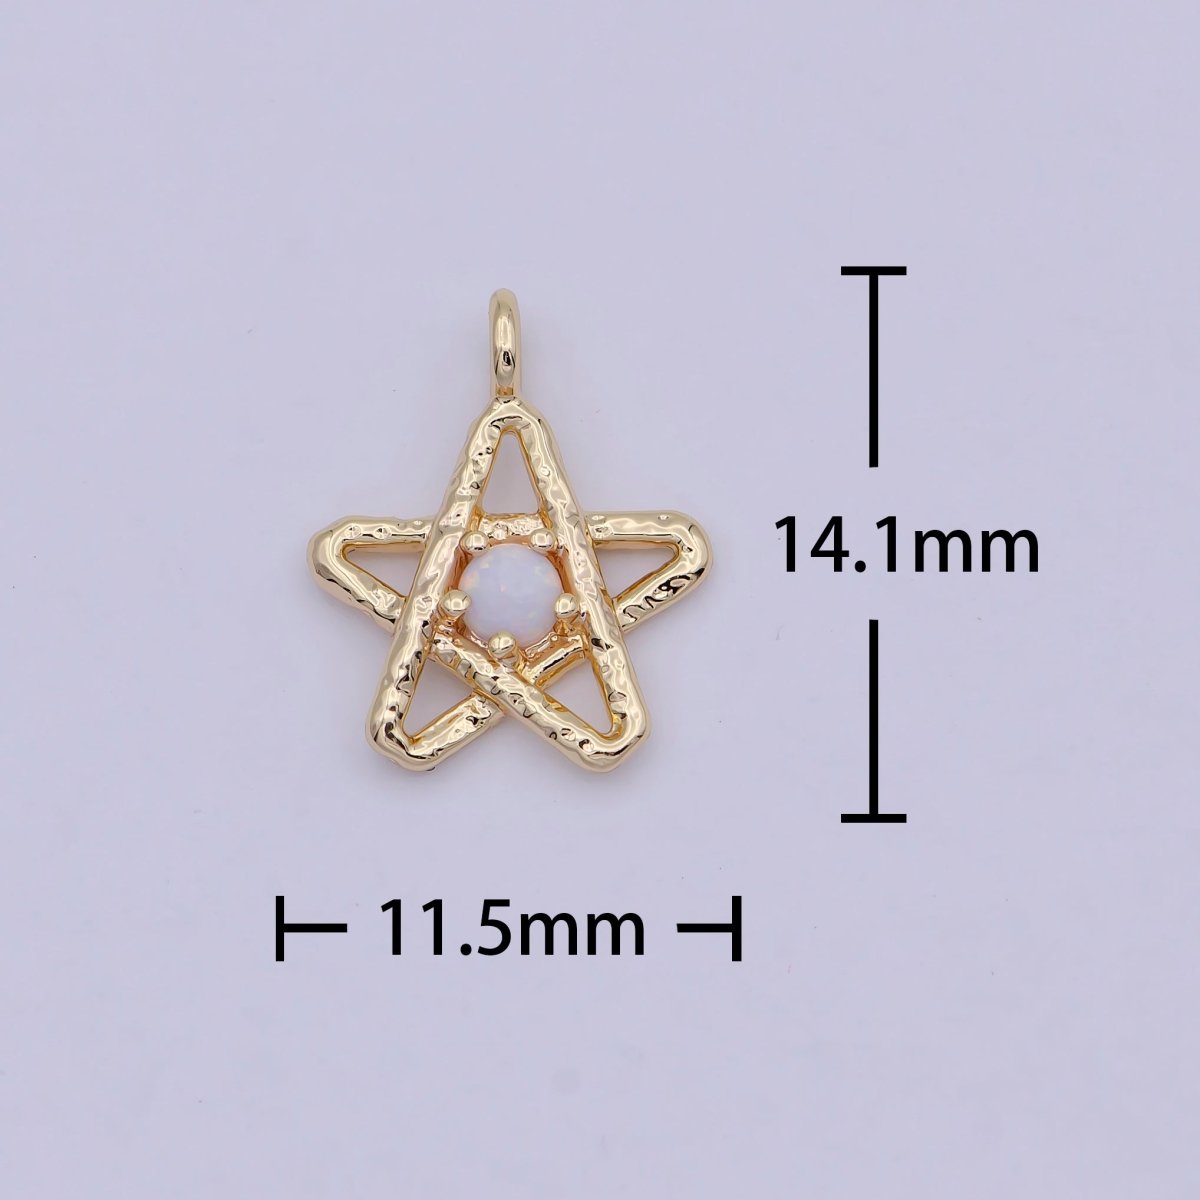 Mini Star Charm with Opal Stone 18K Gold Filled Coin Pendant for Celestial Minimalist Jewelry N-908 - DLUXCA